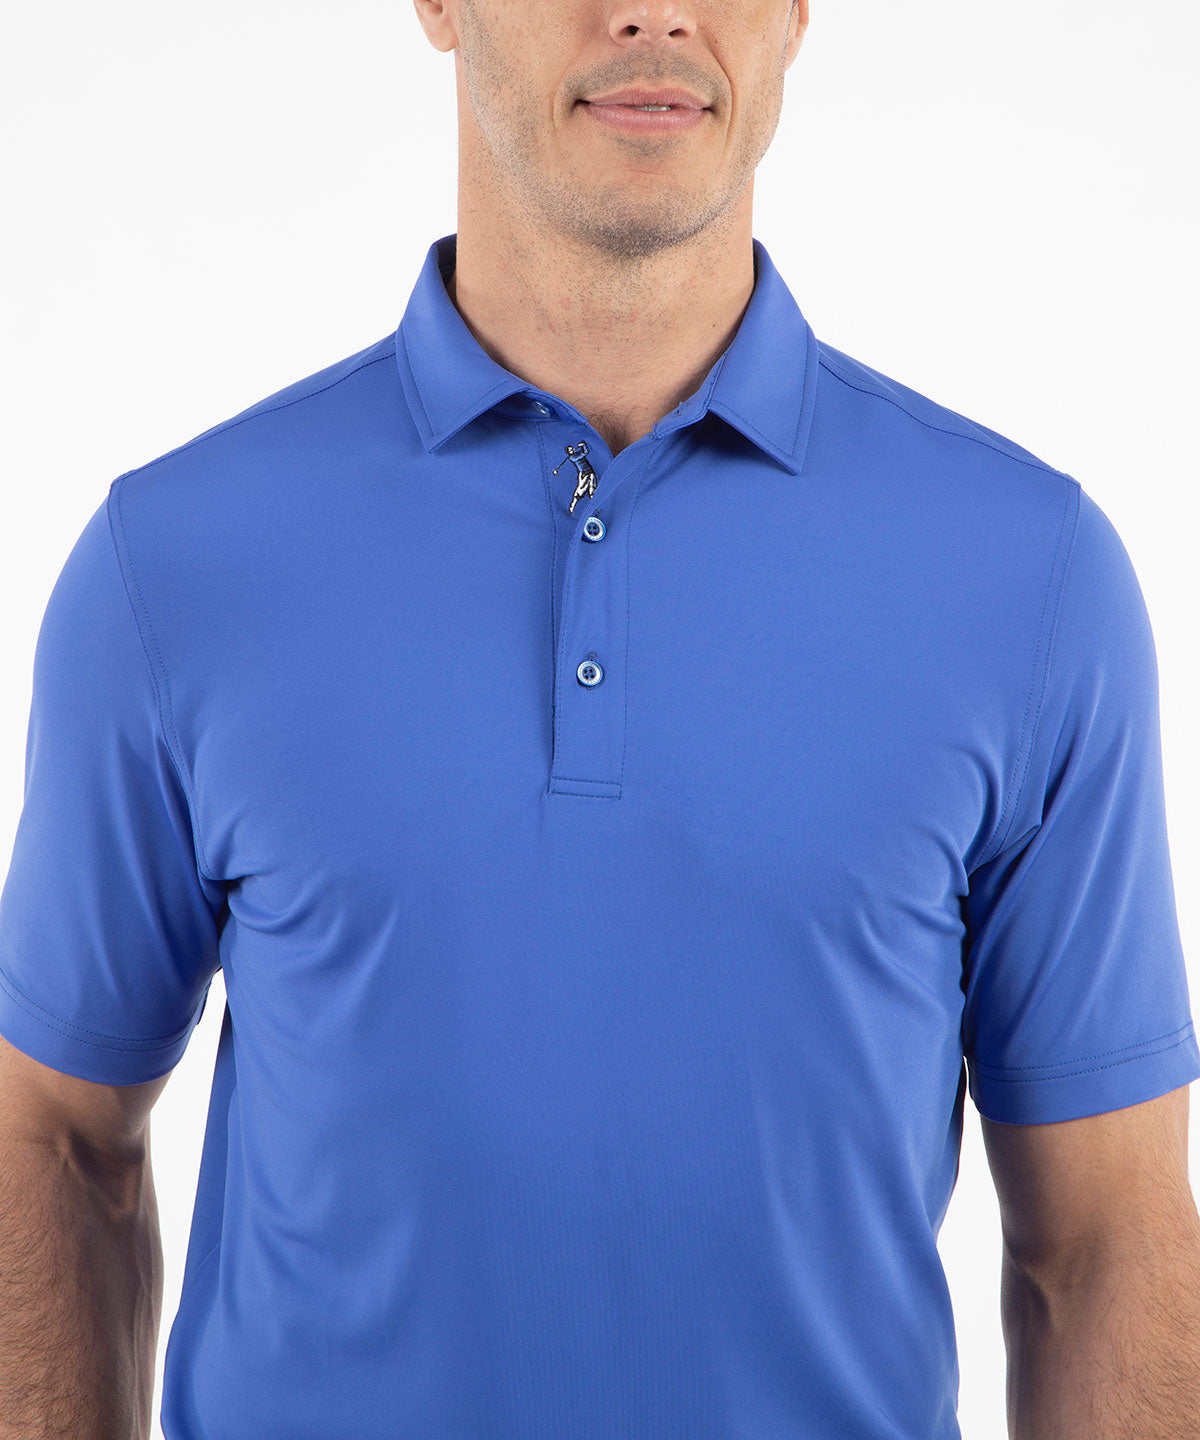 Performance Jersey Solid Polo Shirt